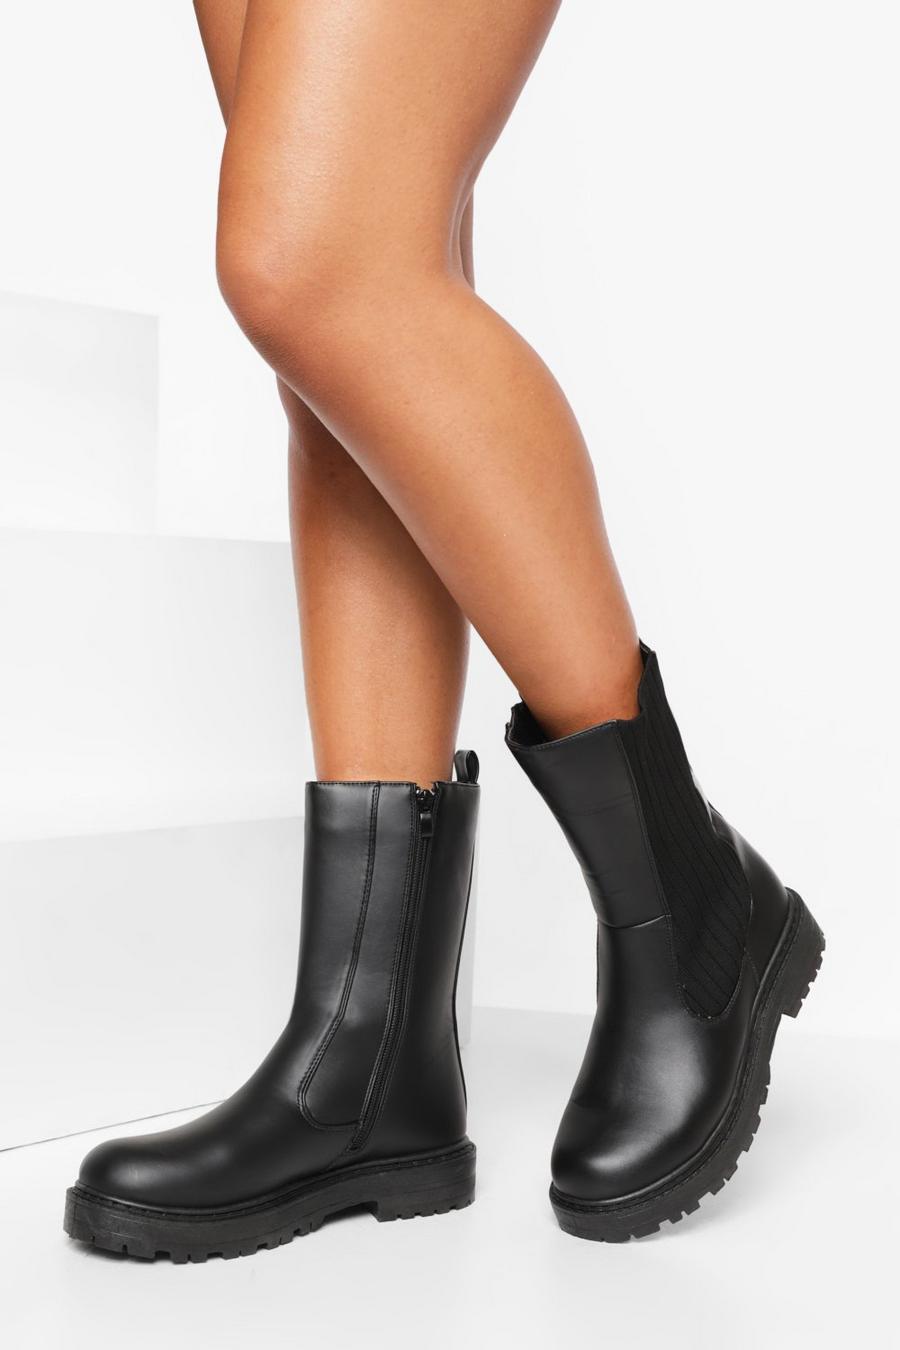 Black Wide Fit Calf High Chelsea Boots image number 1